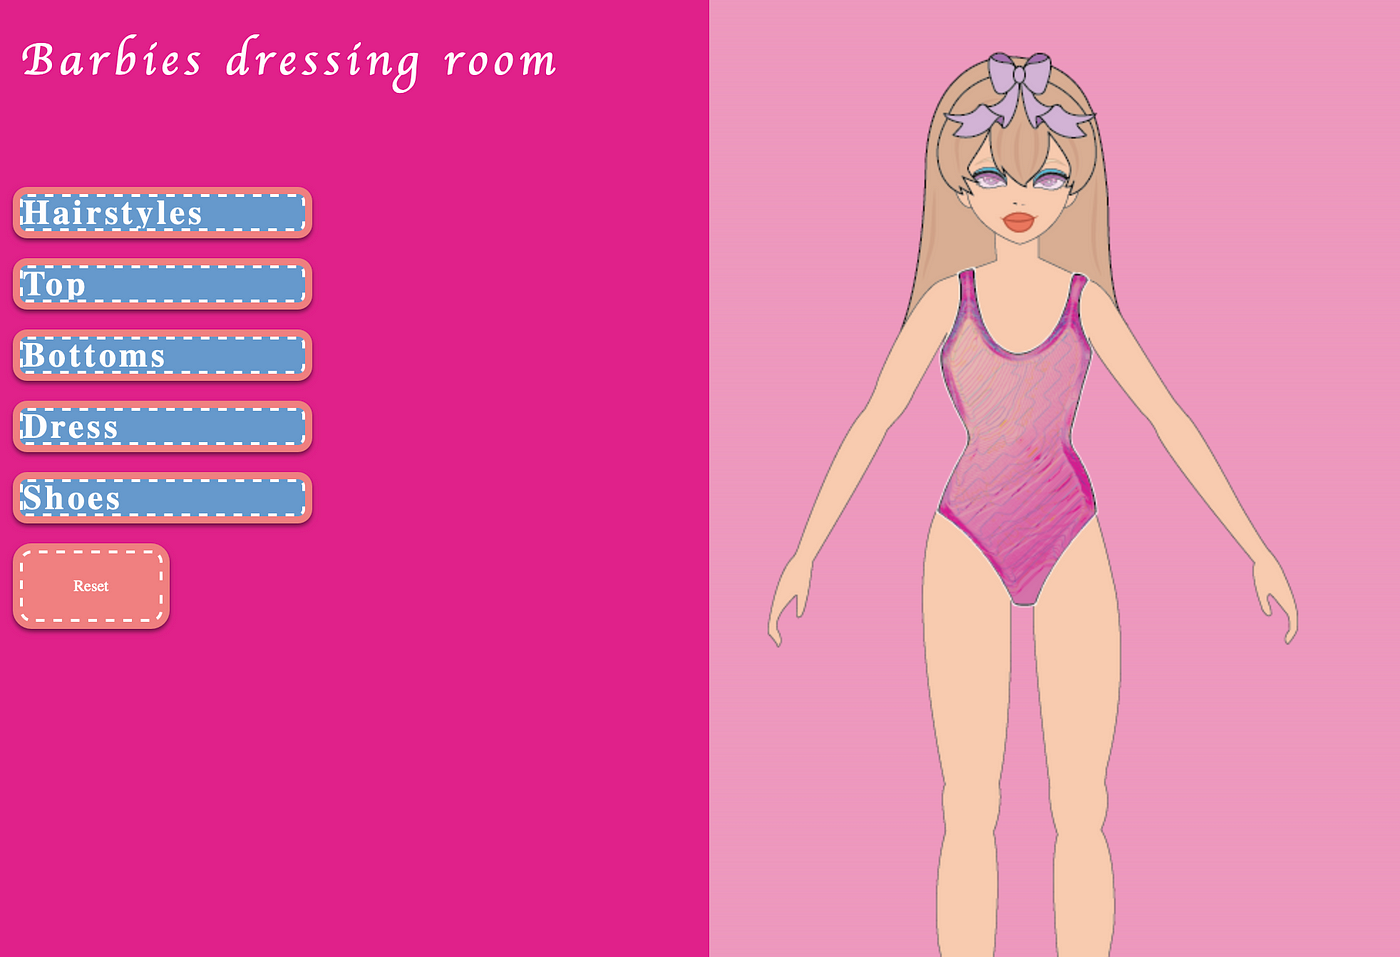 Creating a Dress-Up Game Inspired by the Barbie Movie | by Eliza Fury |  Women in Technology | Medium